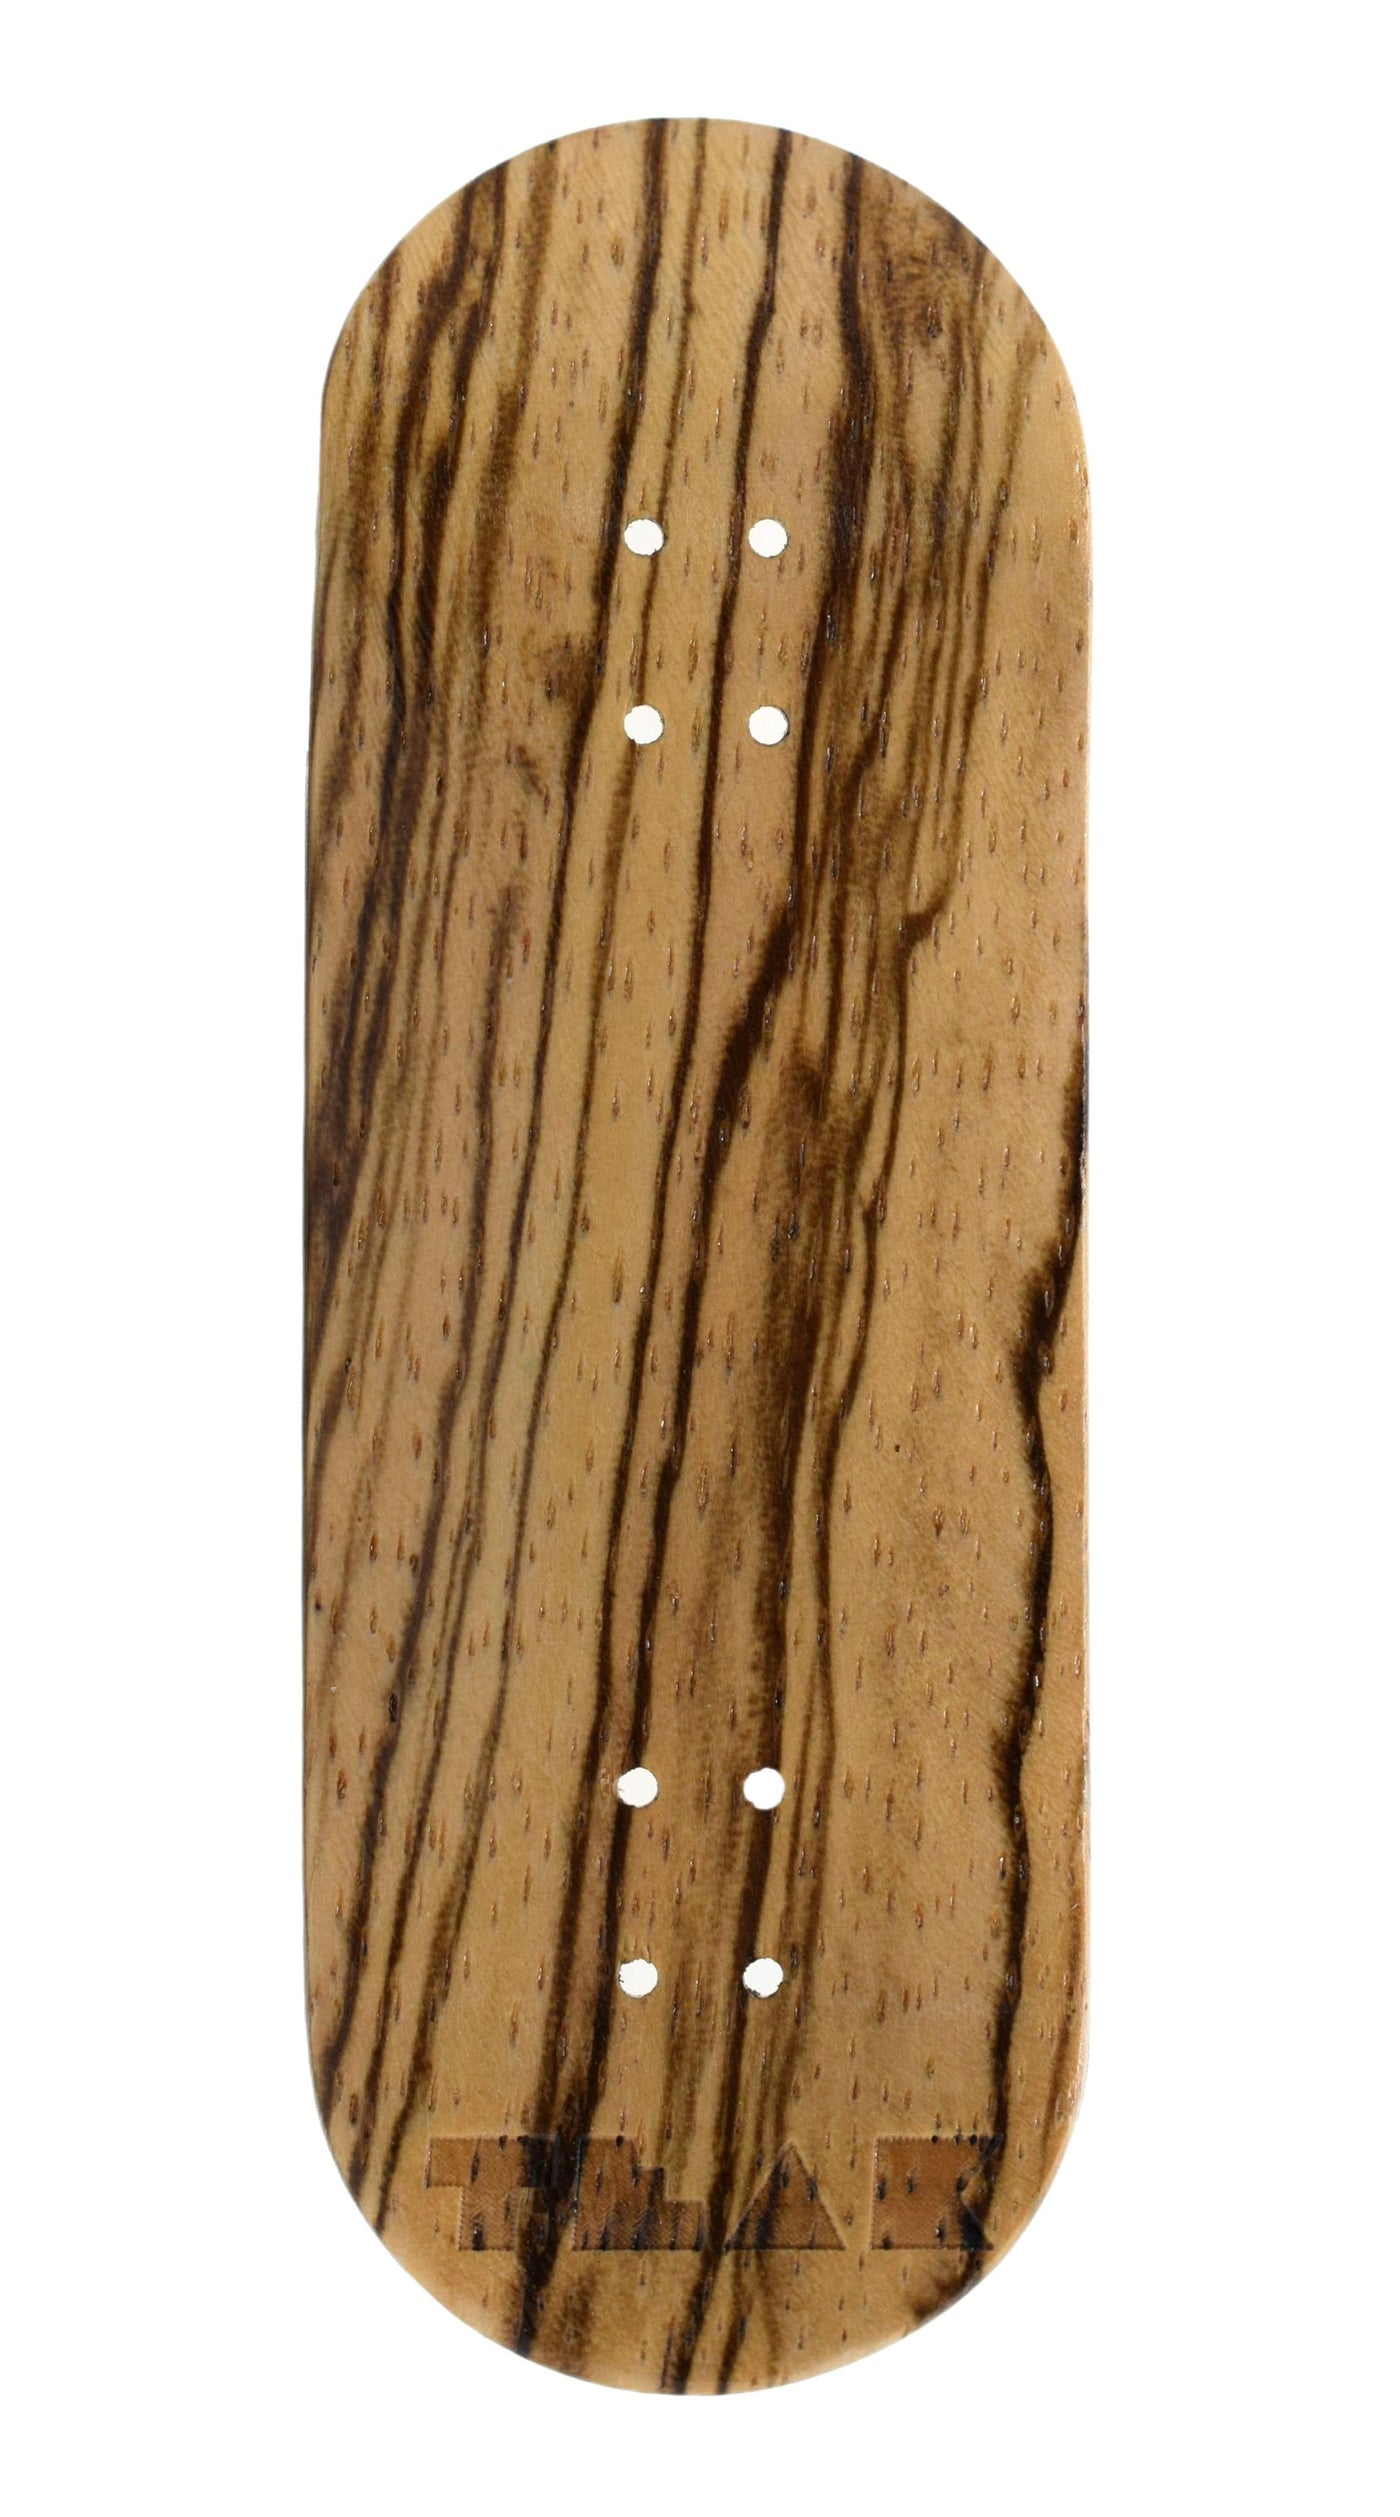 Teak Tuning PROlific Wooden 5 Ply Fingerboard Deck 32x95mm - The Classic - with Color Matching Mid Ply